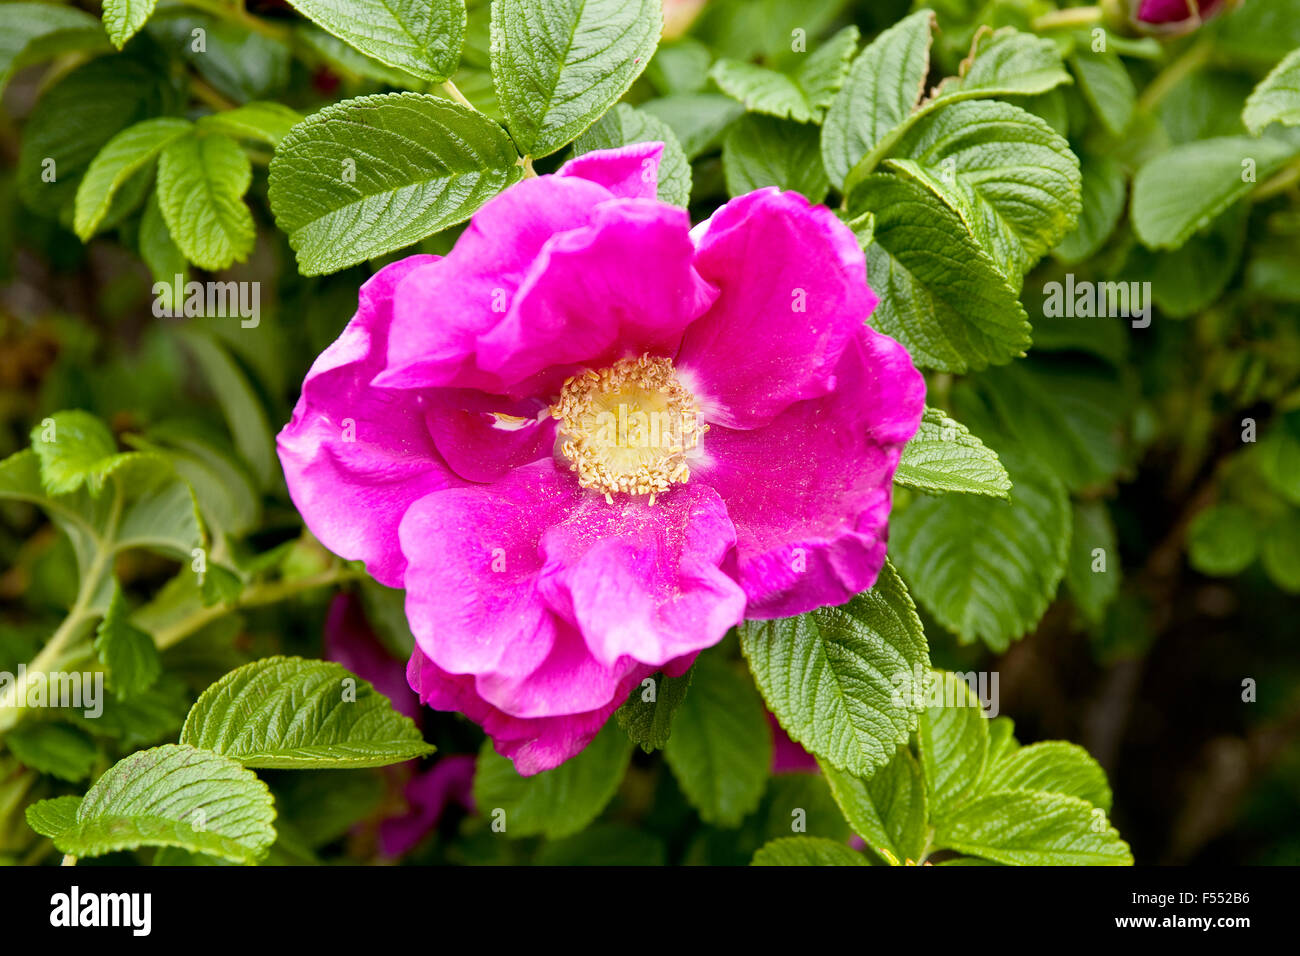 Salt Spray Rose High Resolution Stock Photography and Images - Alamy